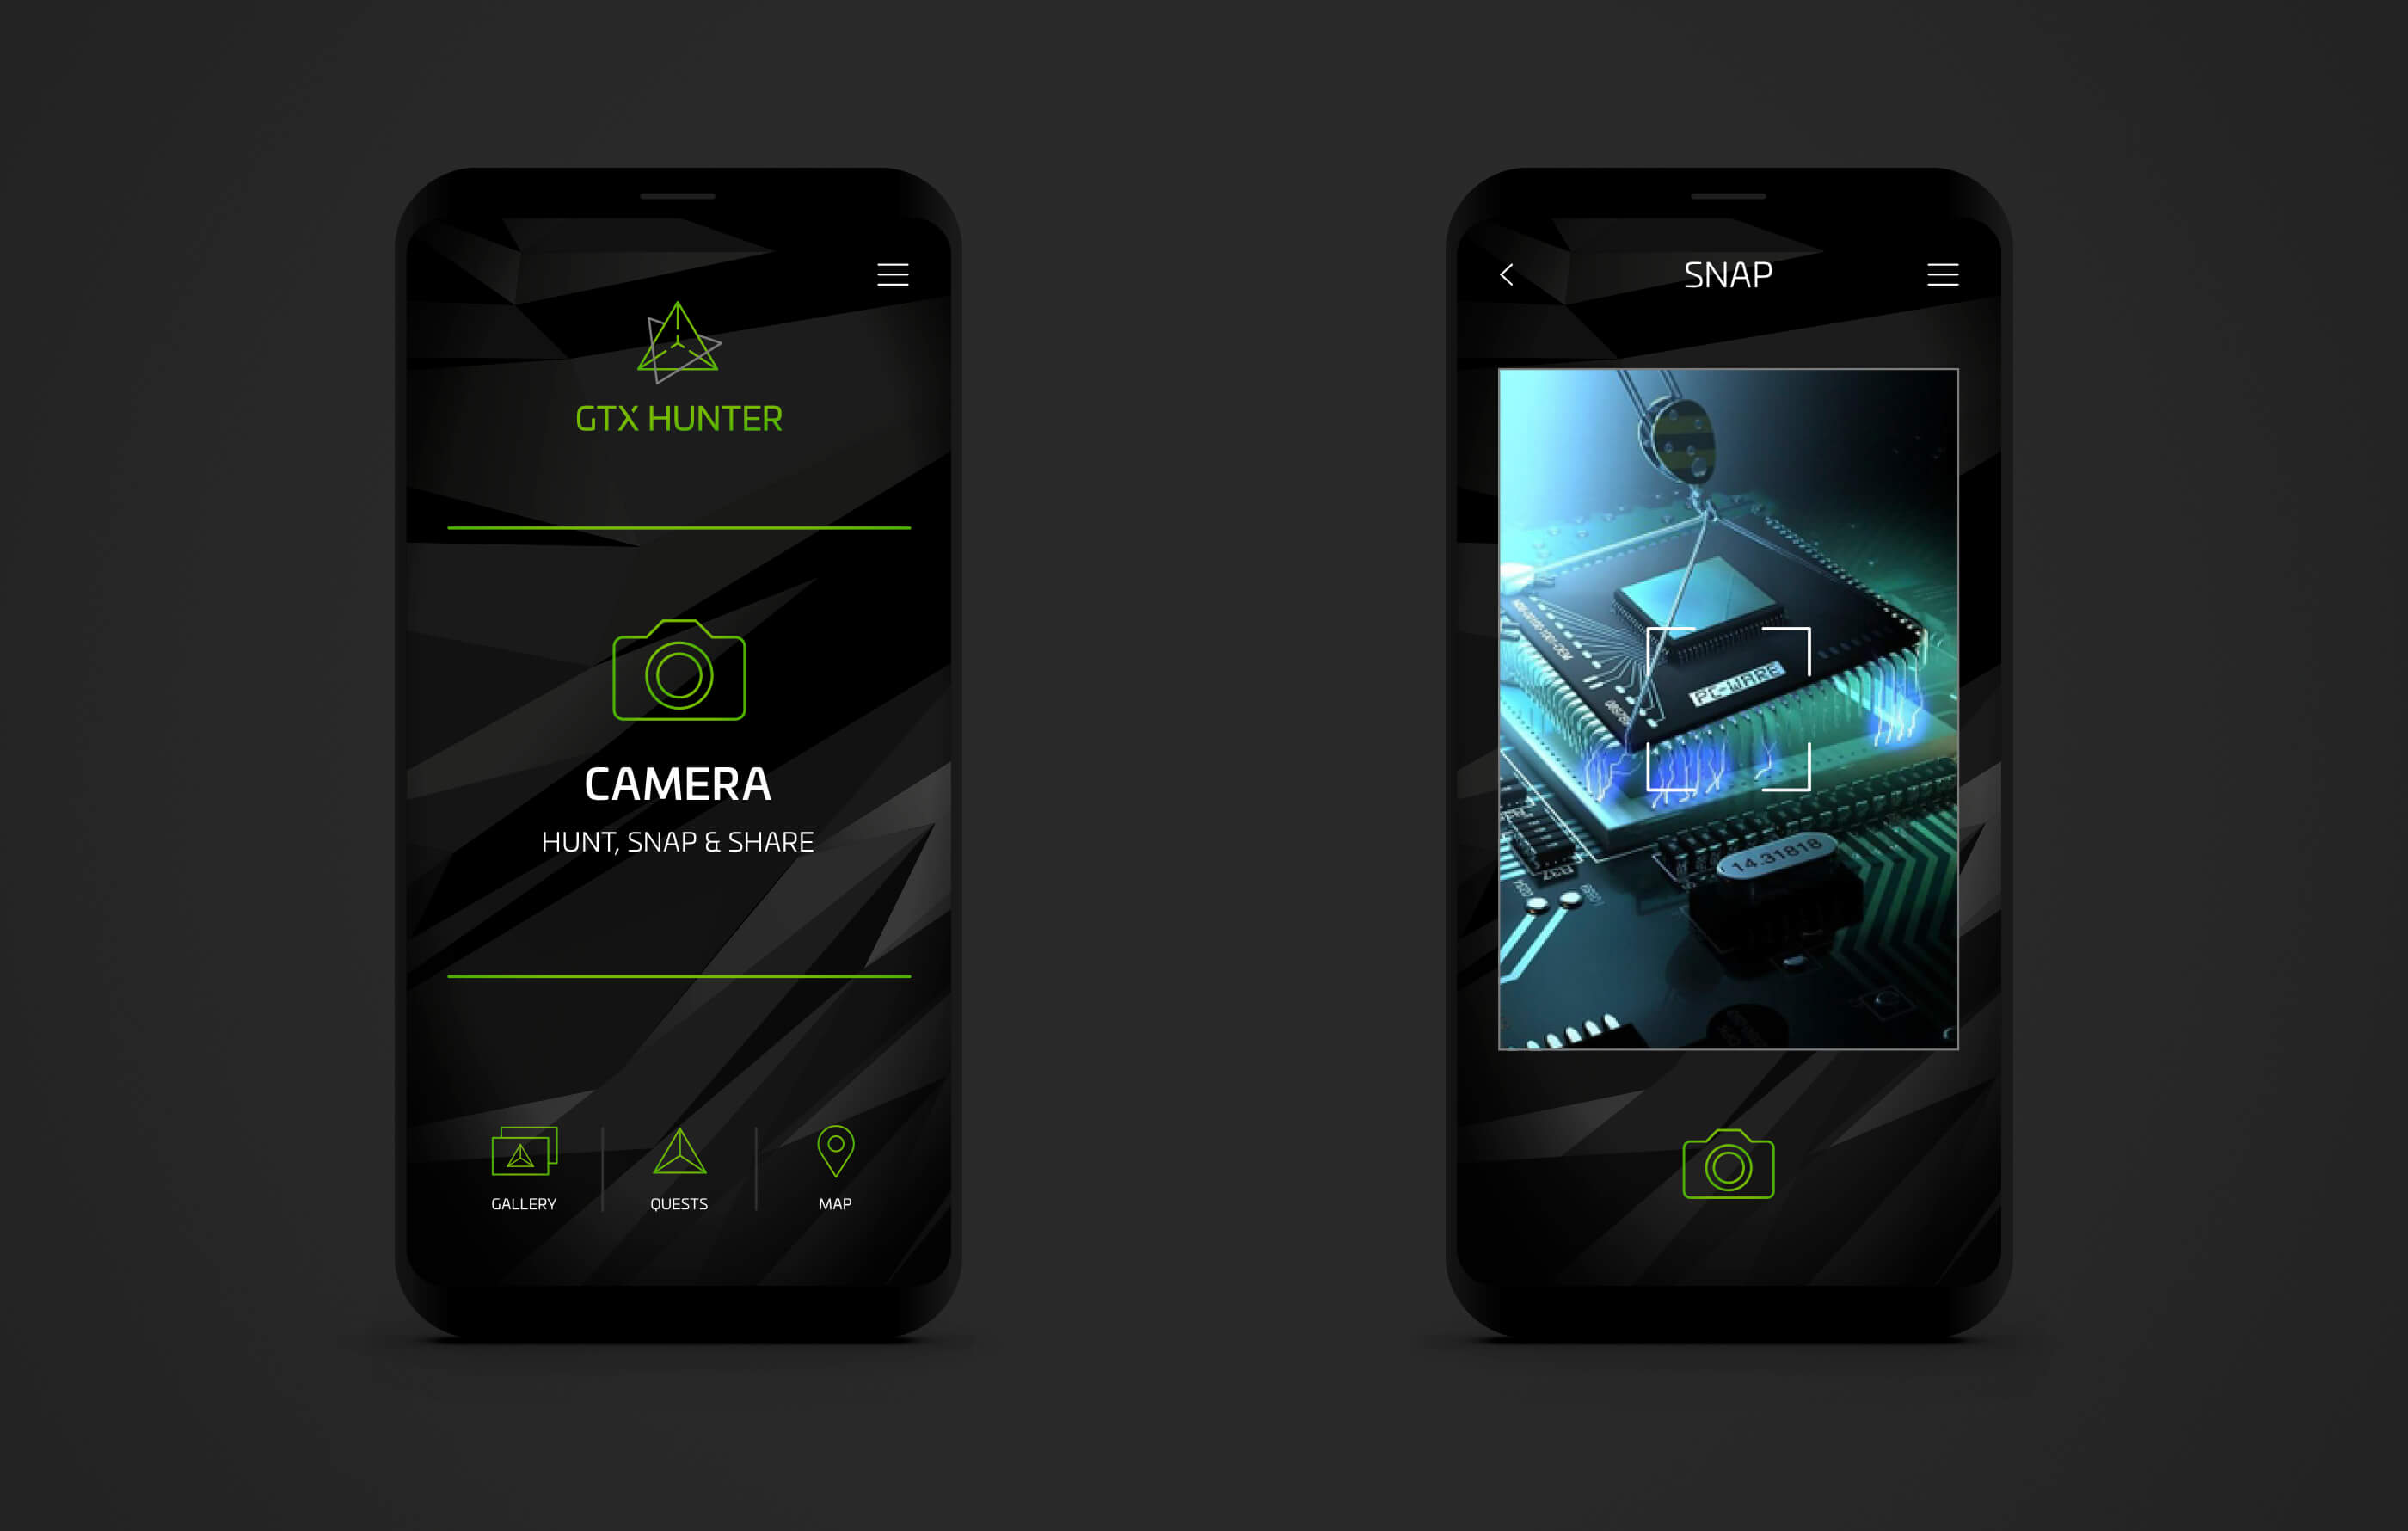 Final renders of two mobile screens, featuring the four main areas of the app – Camera, Gallery, Quests and Map